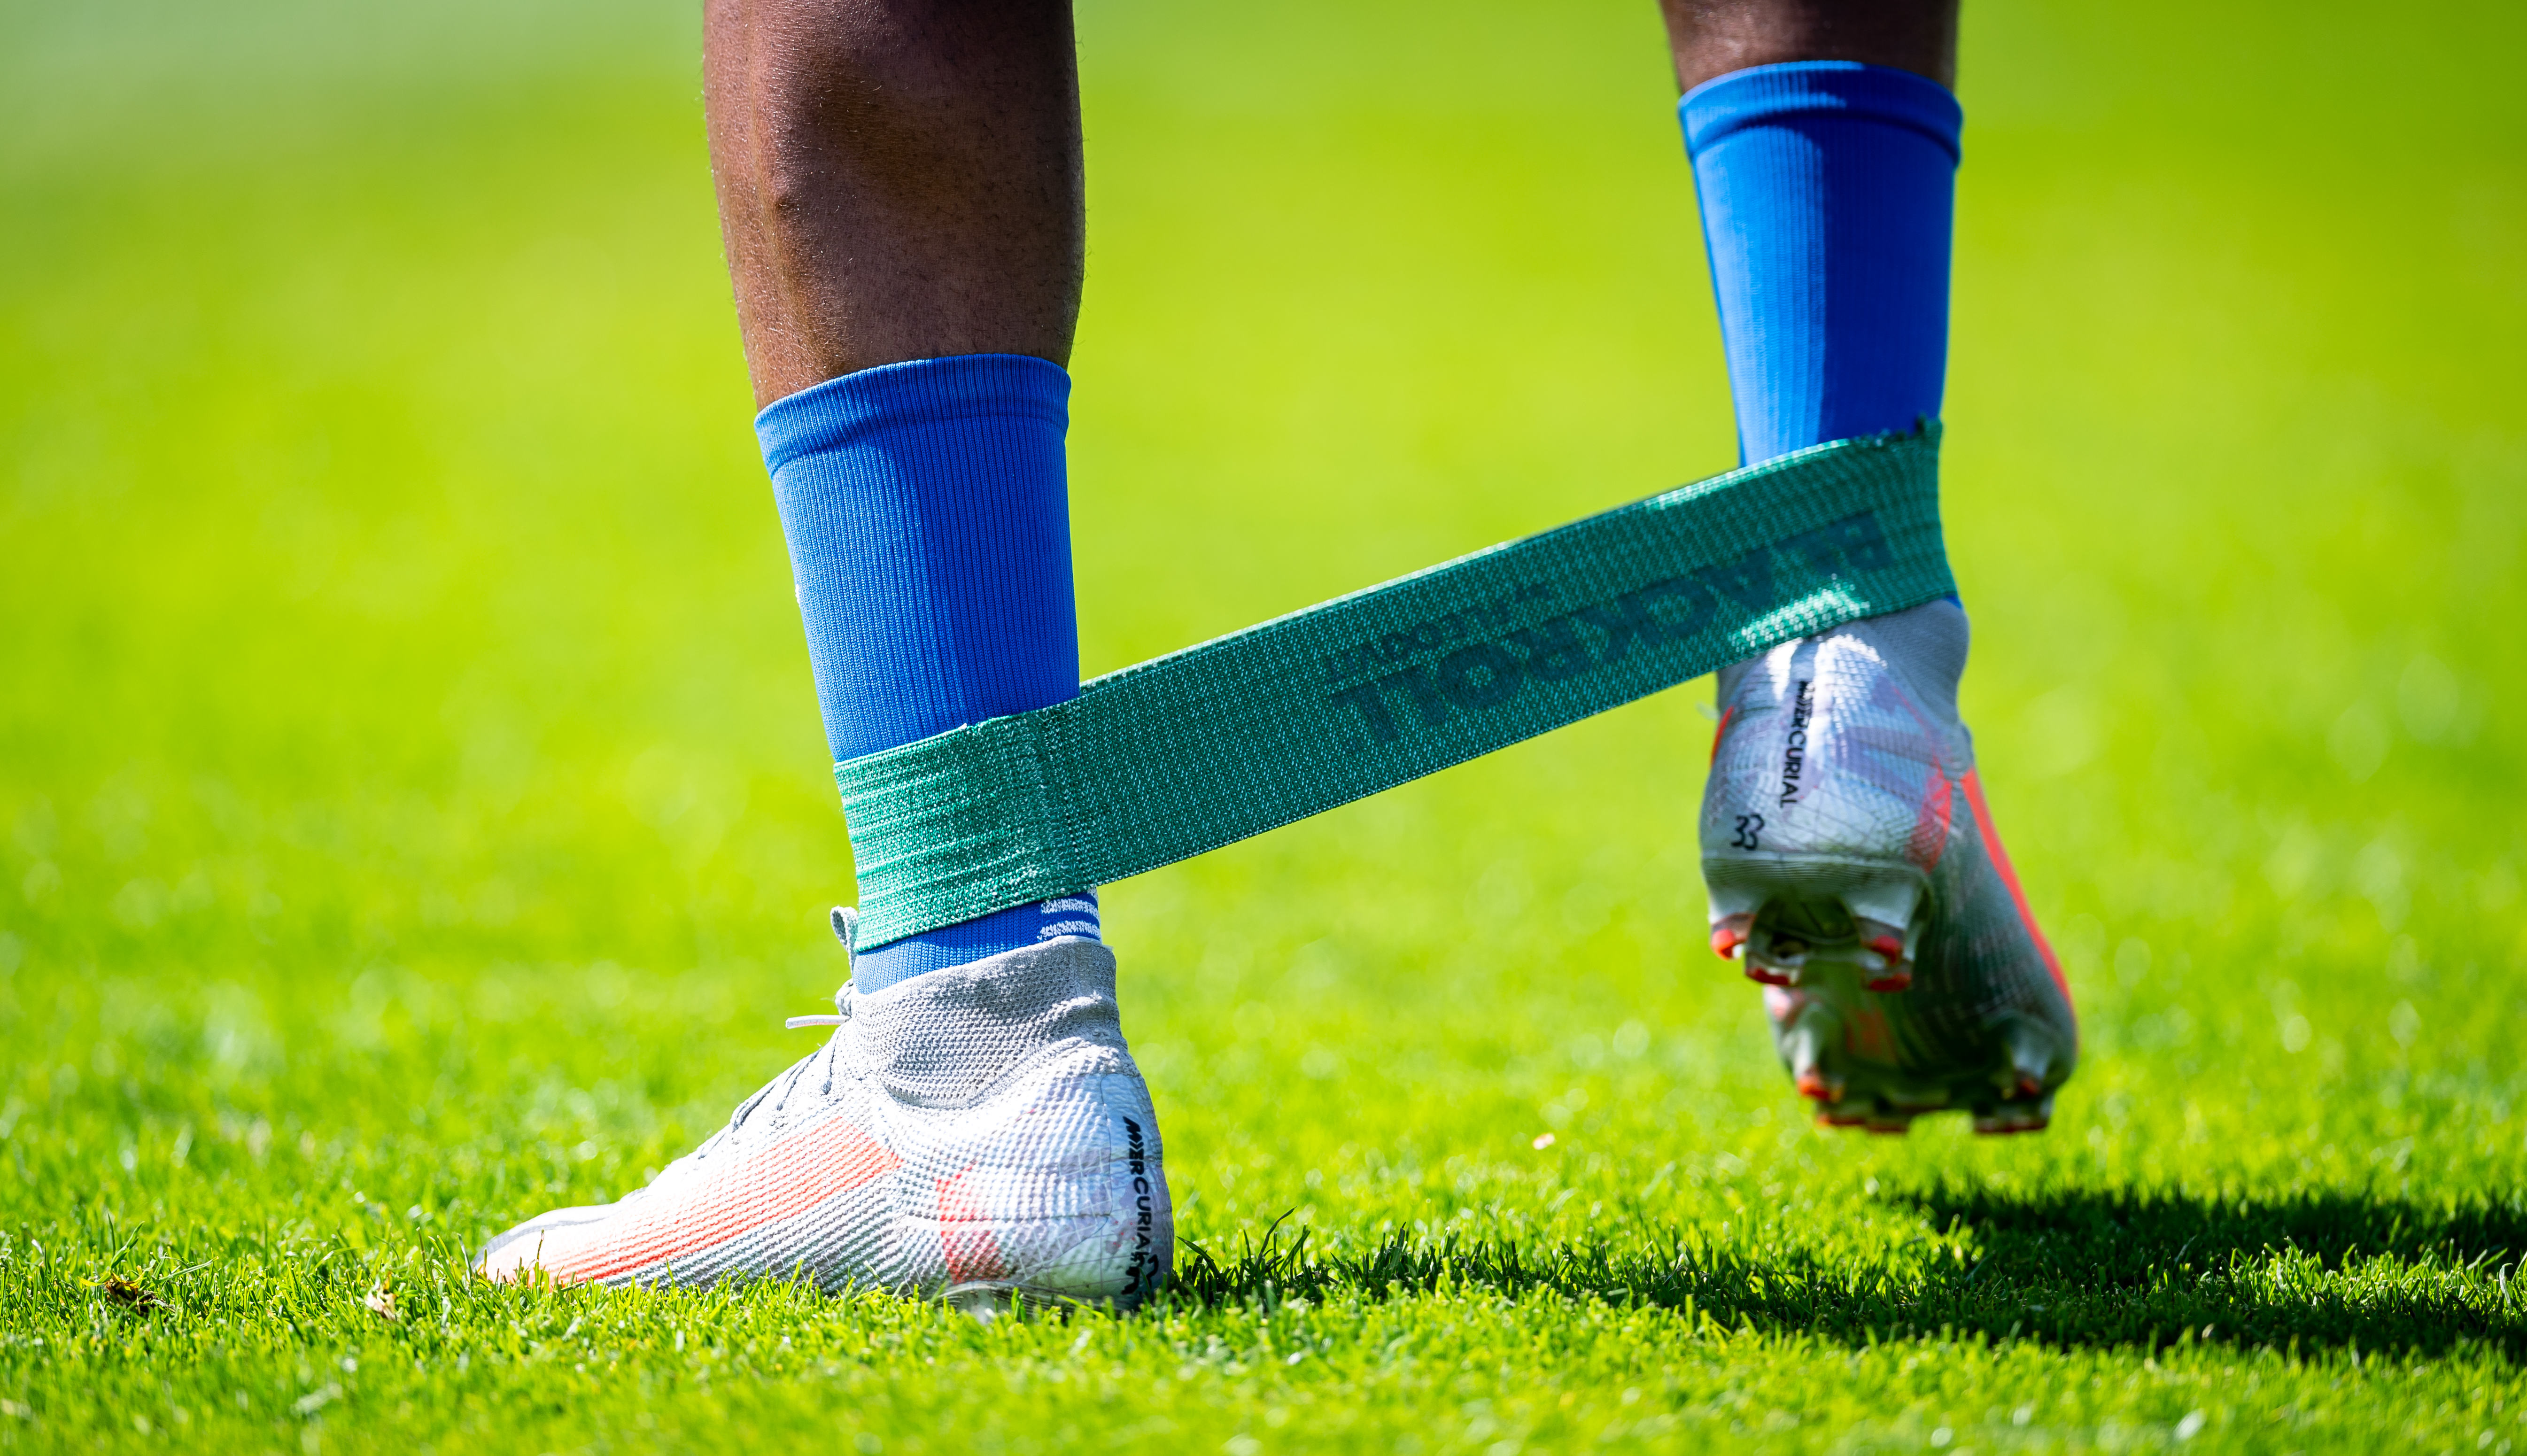 Close up of football boots and a resistance band being worn by a Hertha BSC player.